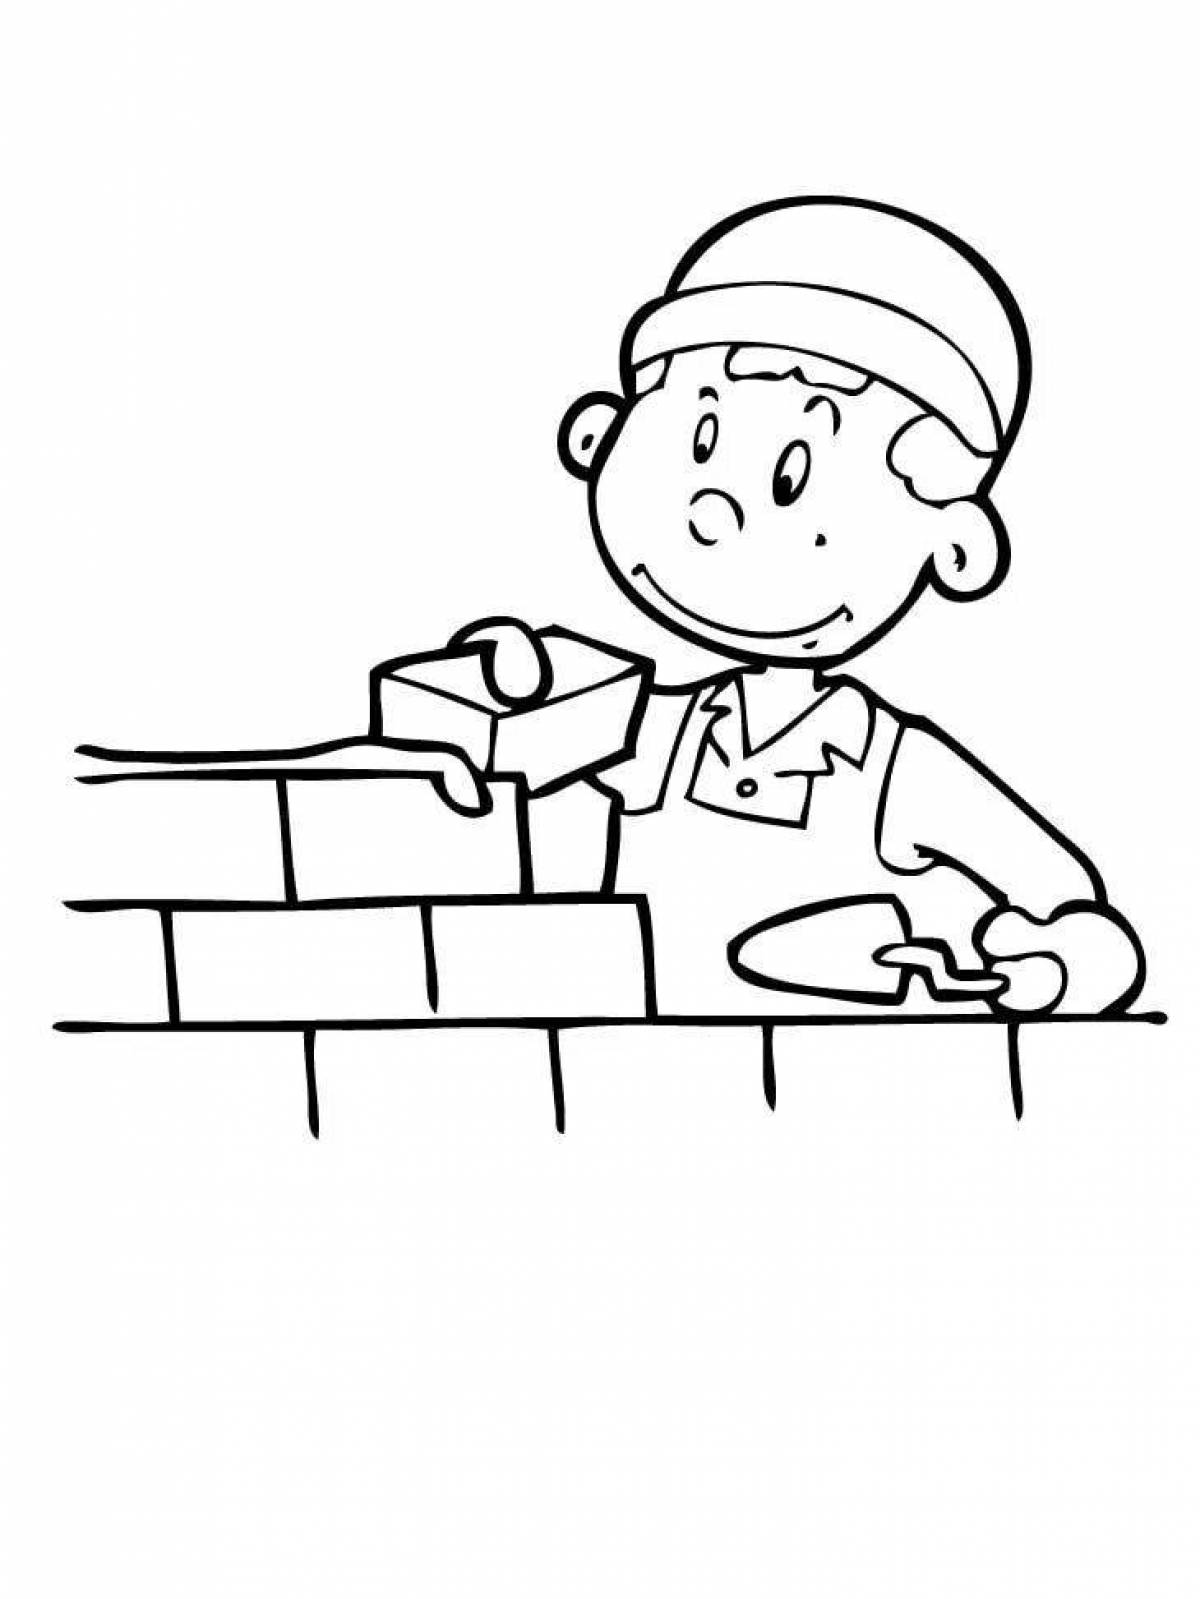 Fun job coloring pages for kids